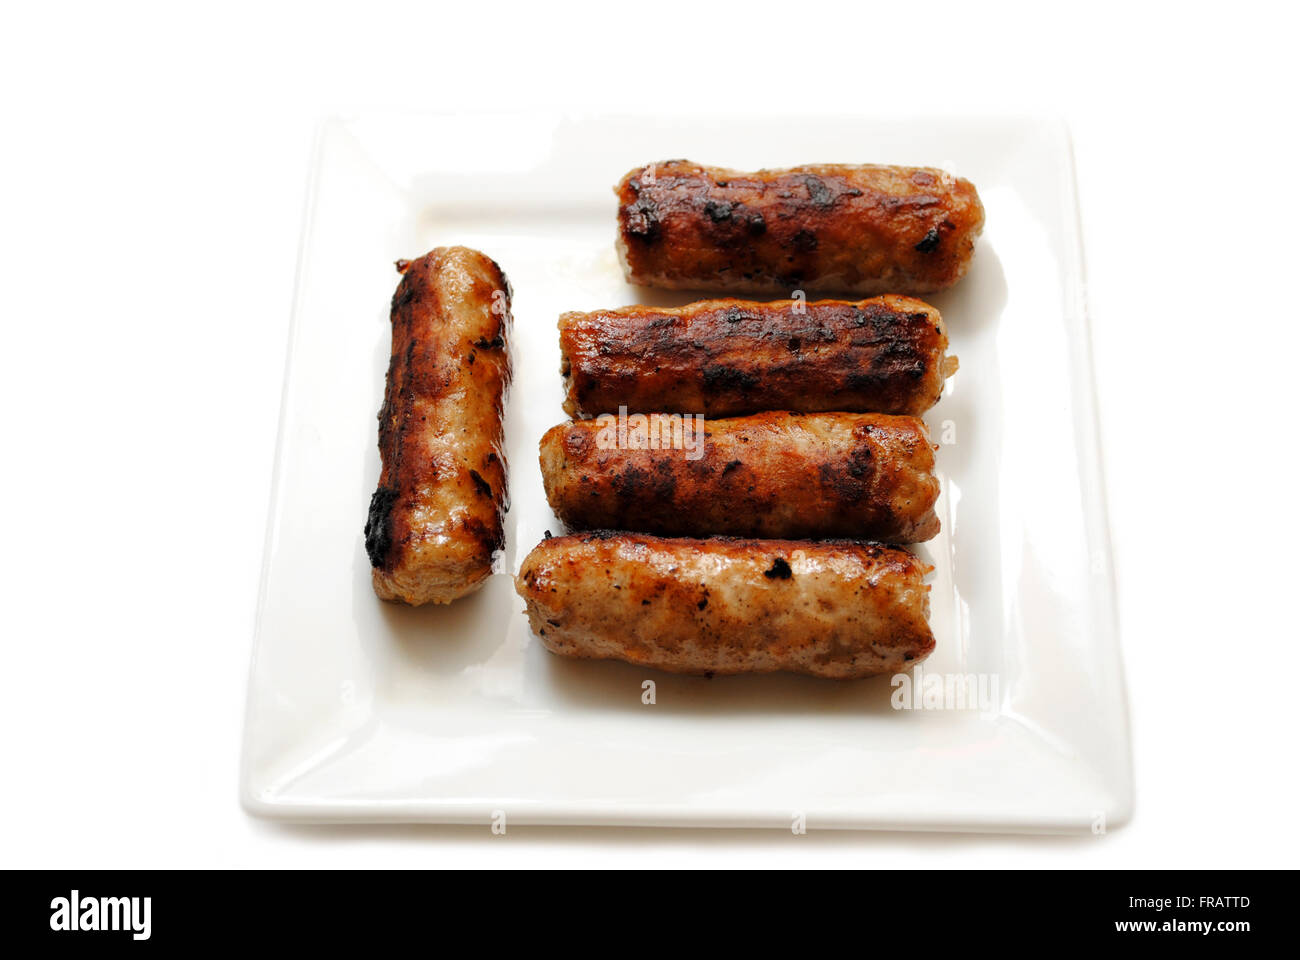 Cooked Breakfast Sausage Served on a White Plate Stock Photo